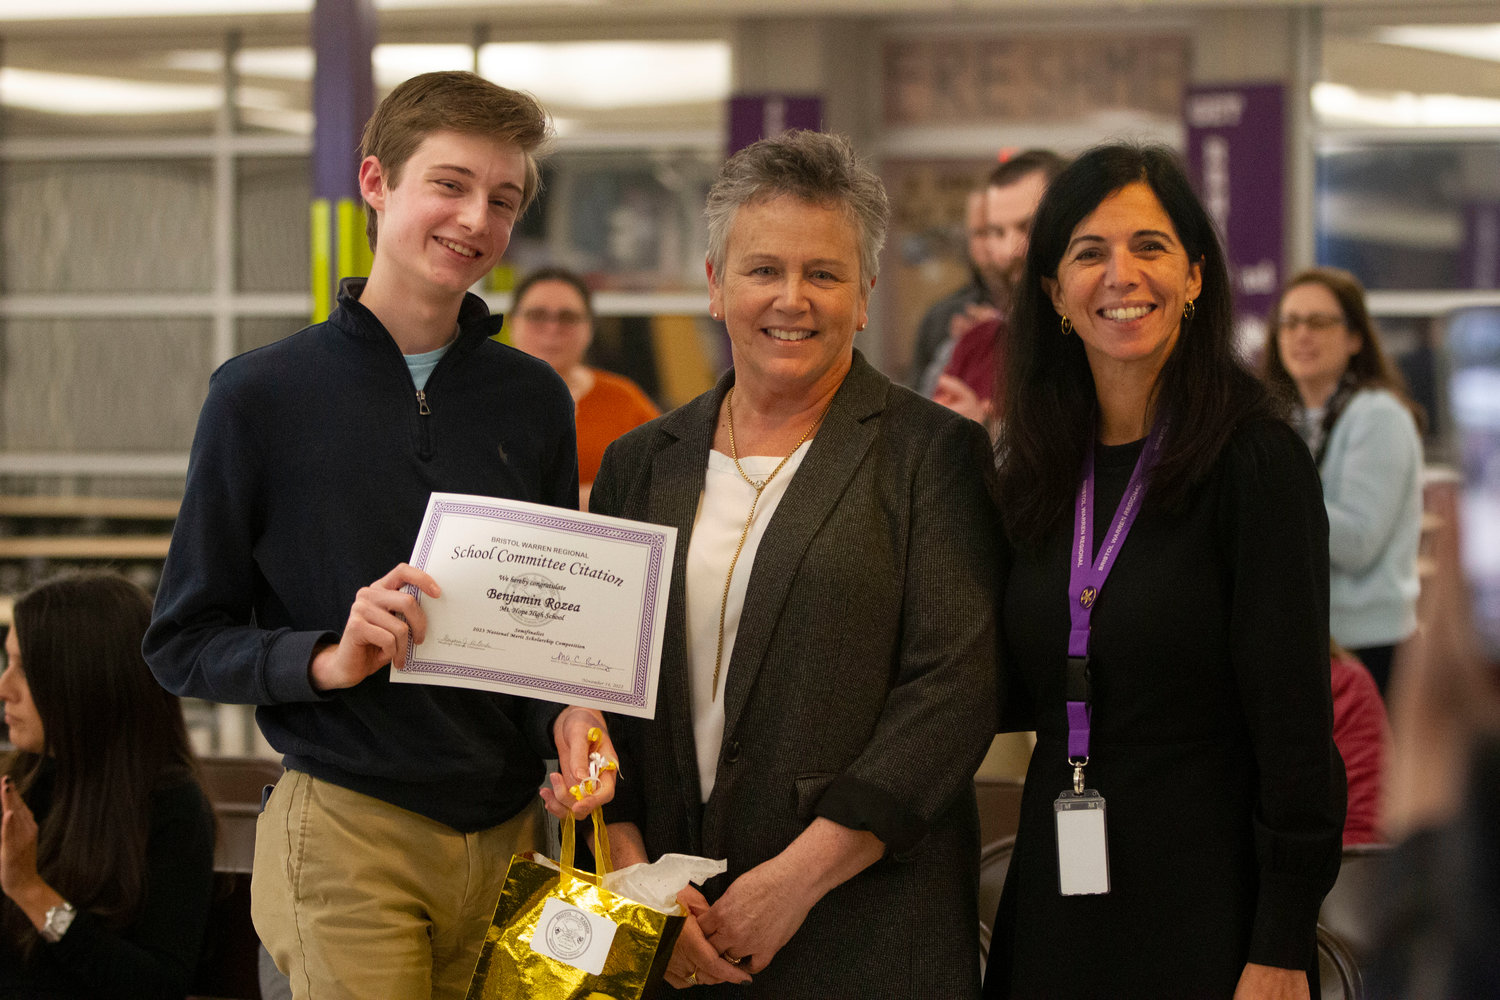 Mt. Hope student Benjamin Rozea, along with Mt. Hope principal Michelle King and superintendent Ana Riley, was recognized Monday night after being named a semifinalist in the 2023 National Merit Scholarship competition following his performance on the recent PSAT qualifying test.